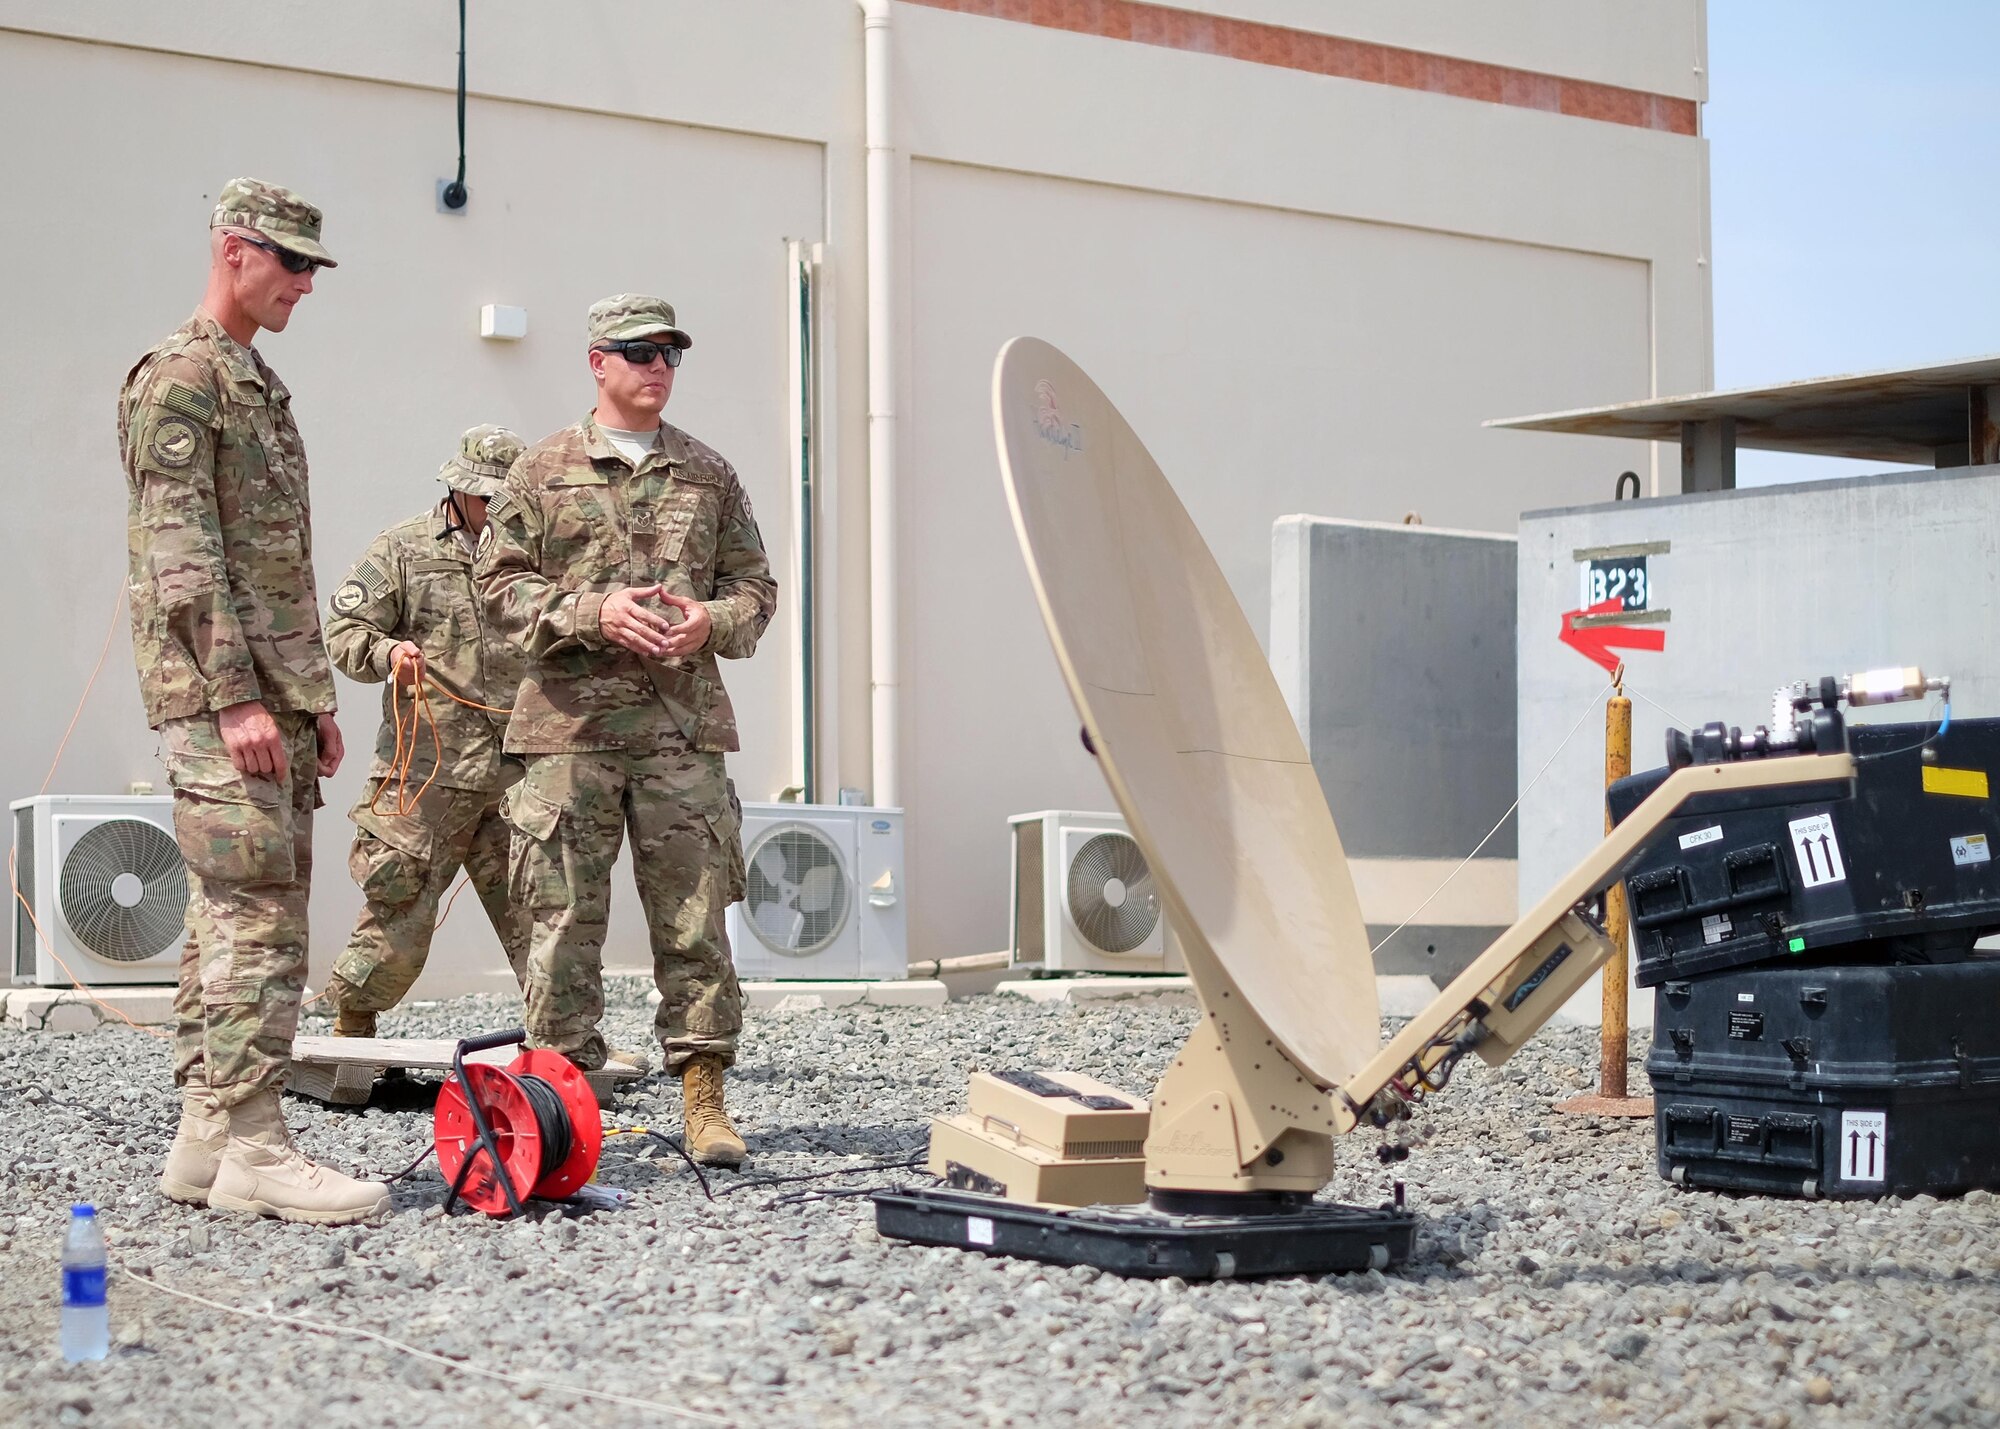 Col. Dee Jay Katzer, left, 380th Expeditionary Mission Support Group commander, discusses Hawkeye satellite setup processes with Staff Sgt. Craig, right, 380th Expeditionary Communication Squadron radio frequency transmissions systems Communications Fly-away Kit 28 team lead, June 27, 2017, at an undisclosed location in southwest Asia. The 380 ECS provided leadership with a hands-on look into the squadron's daily operations. This gives commanders a better understanding of the unit's capabilities and limiting factors. (U.S. Air Force photo by Senior Airman Preston Webb)